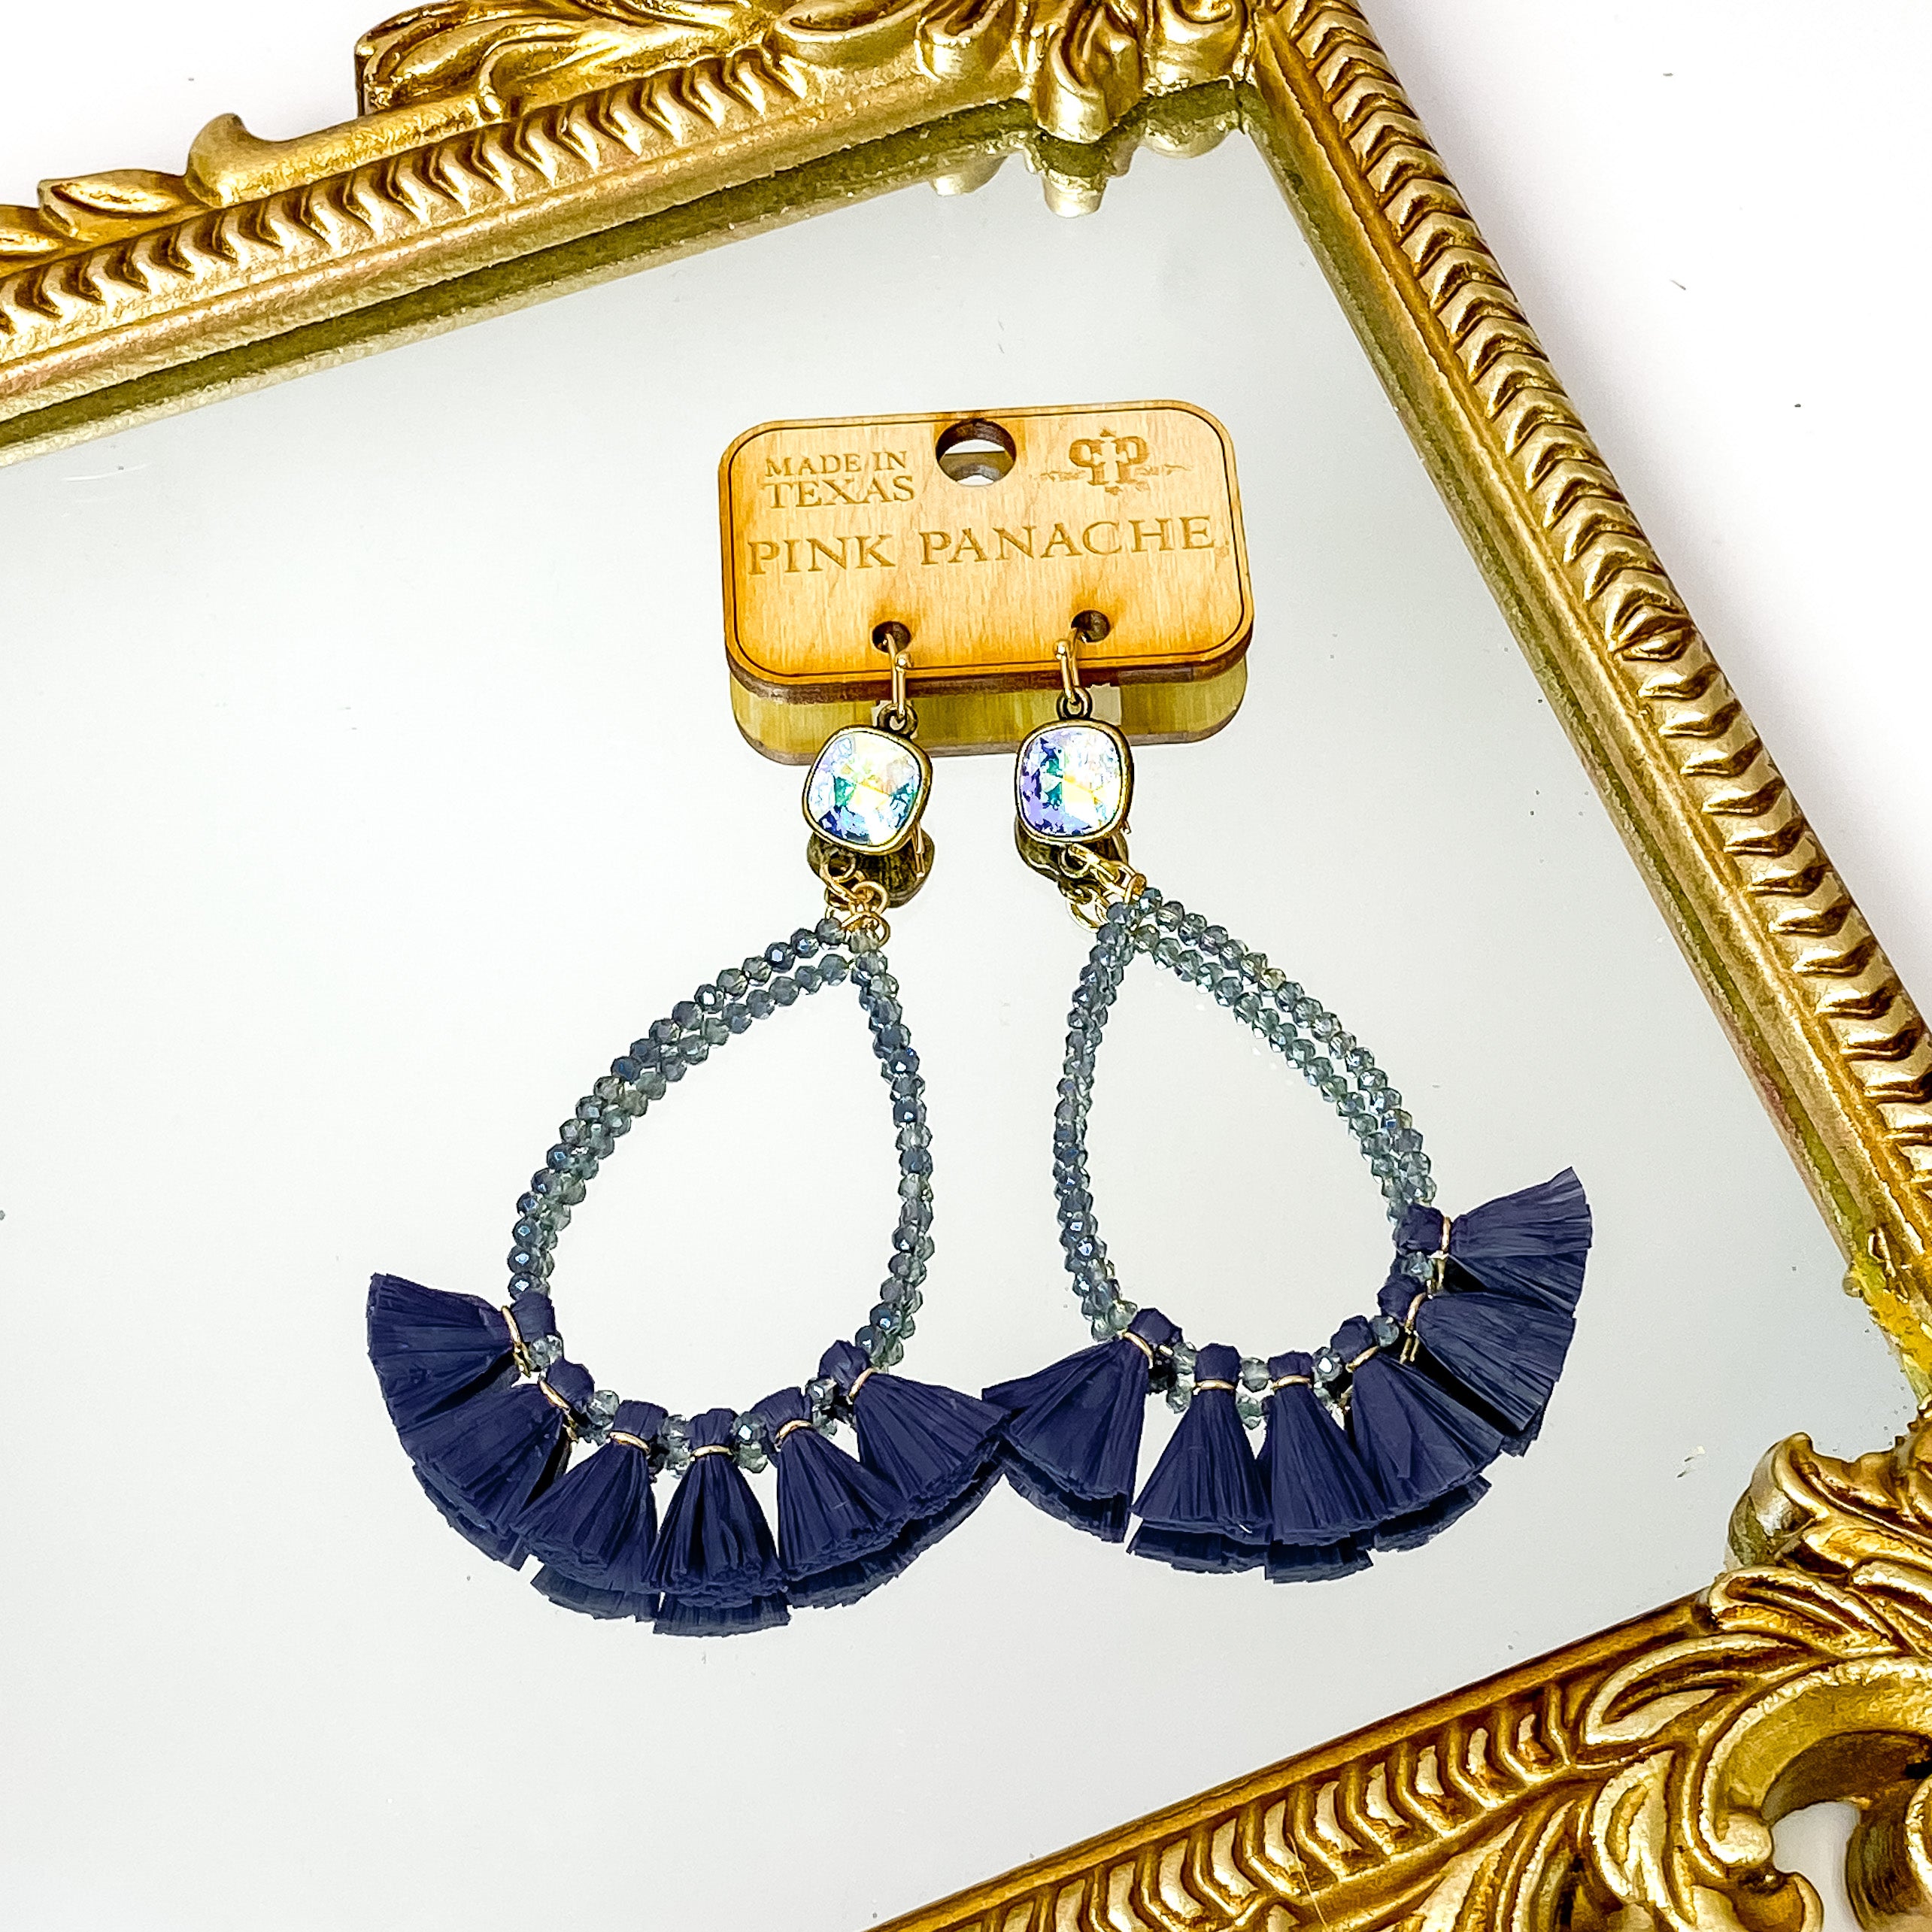 Ab cushion cut drop earrings with a teardrop pendant. The pendant includes navy crystal beads and a navy tassell along the bottom edge. These earrings are pictured on a wood earrings holder on a gold mirror on a white background. 